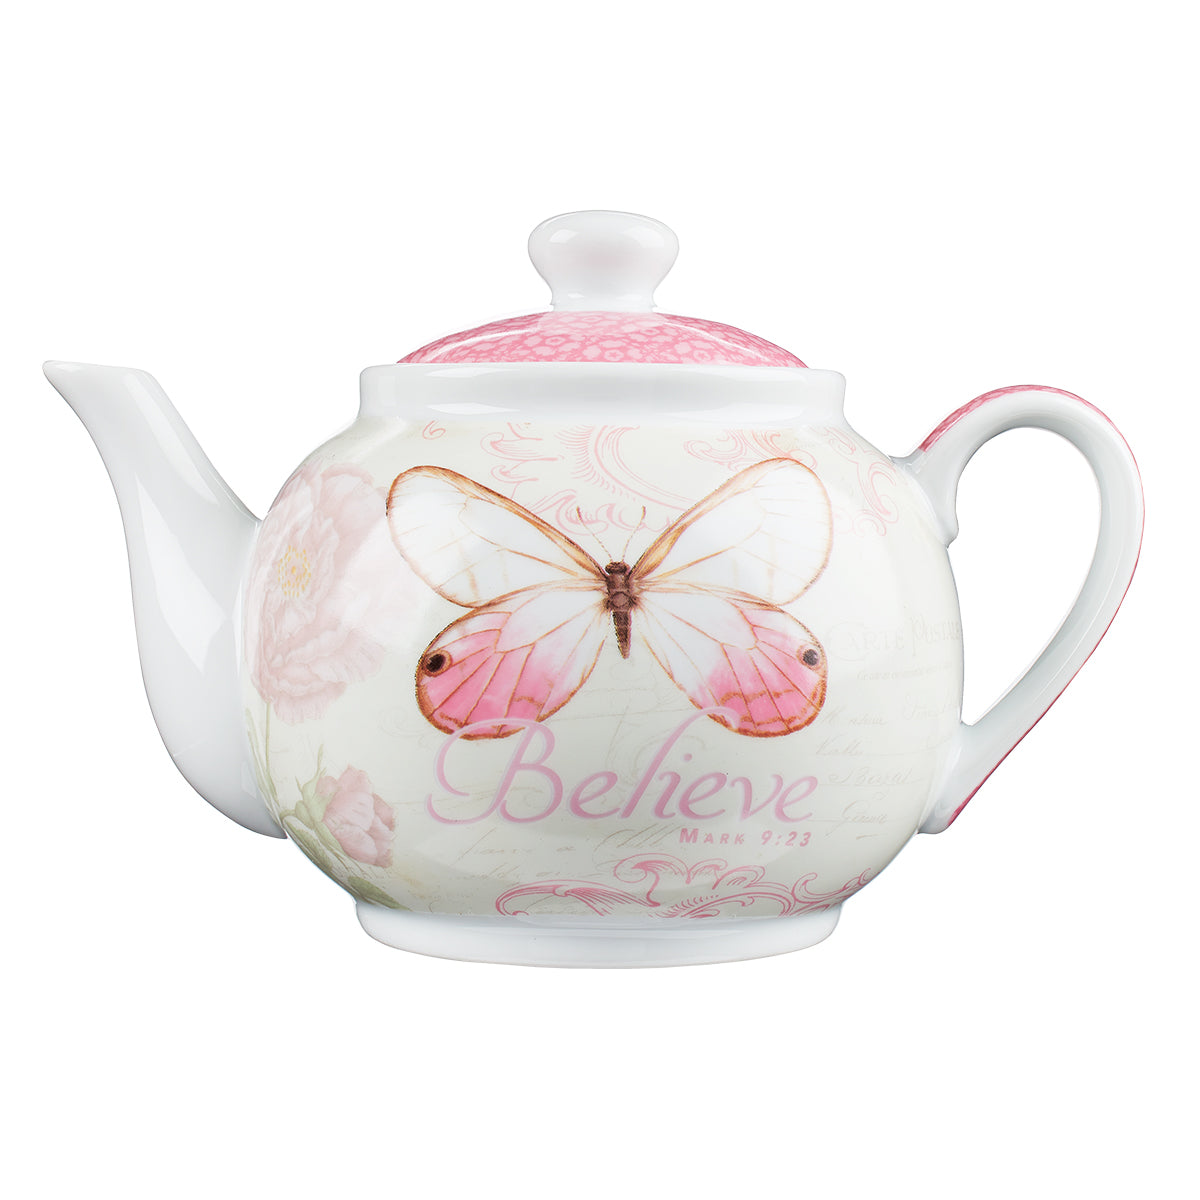 Image of Believe Pink Butterfly Blessings Tea Pot - Mark 9:23 other